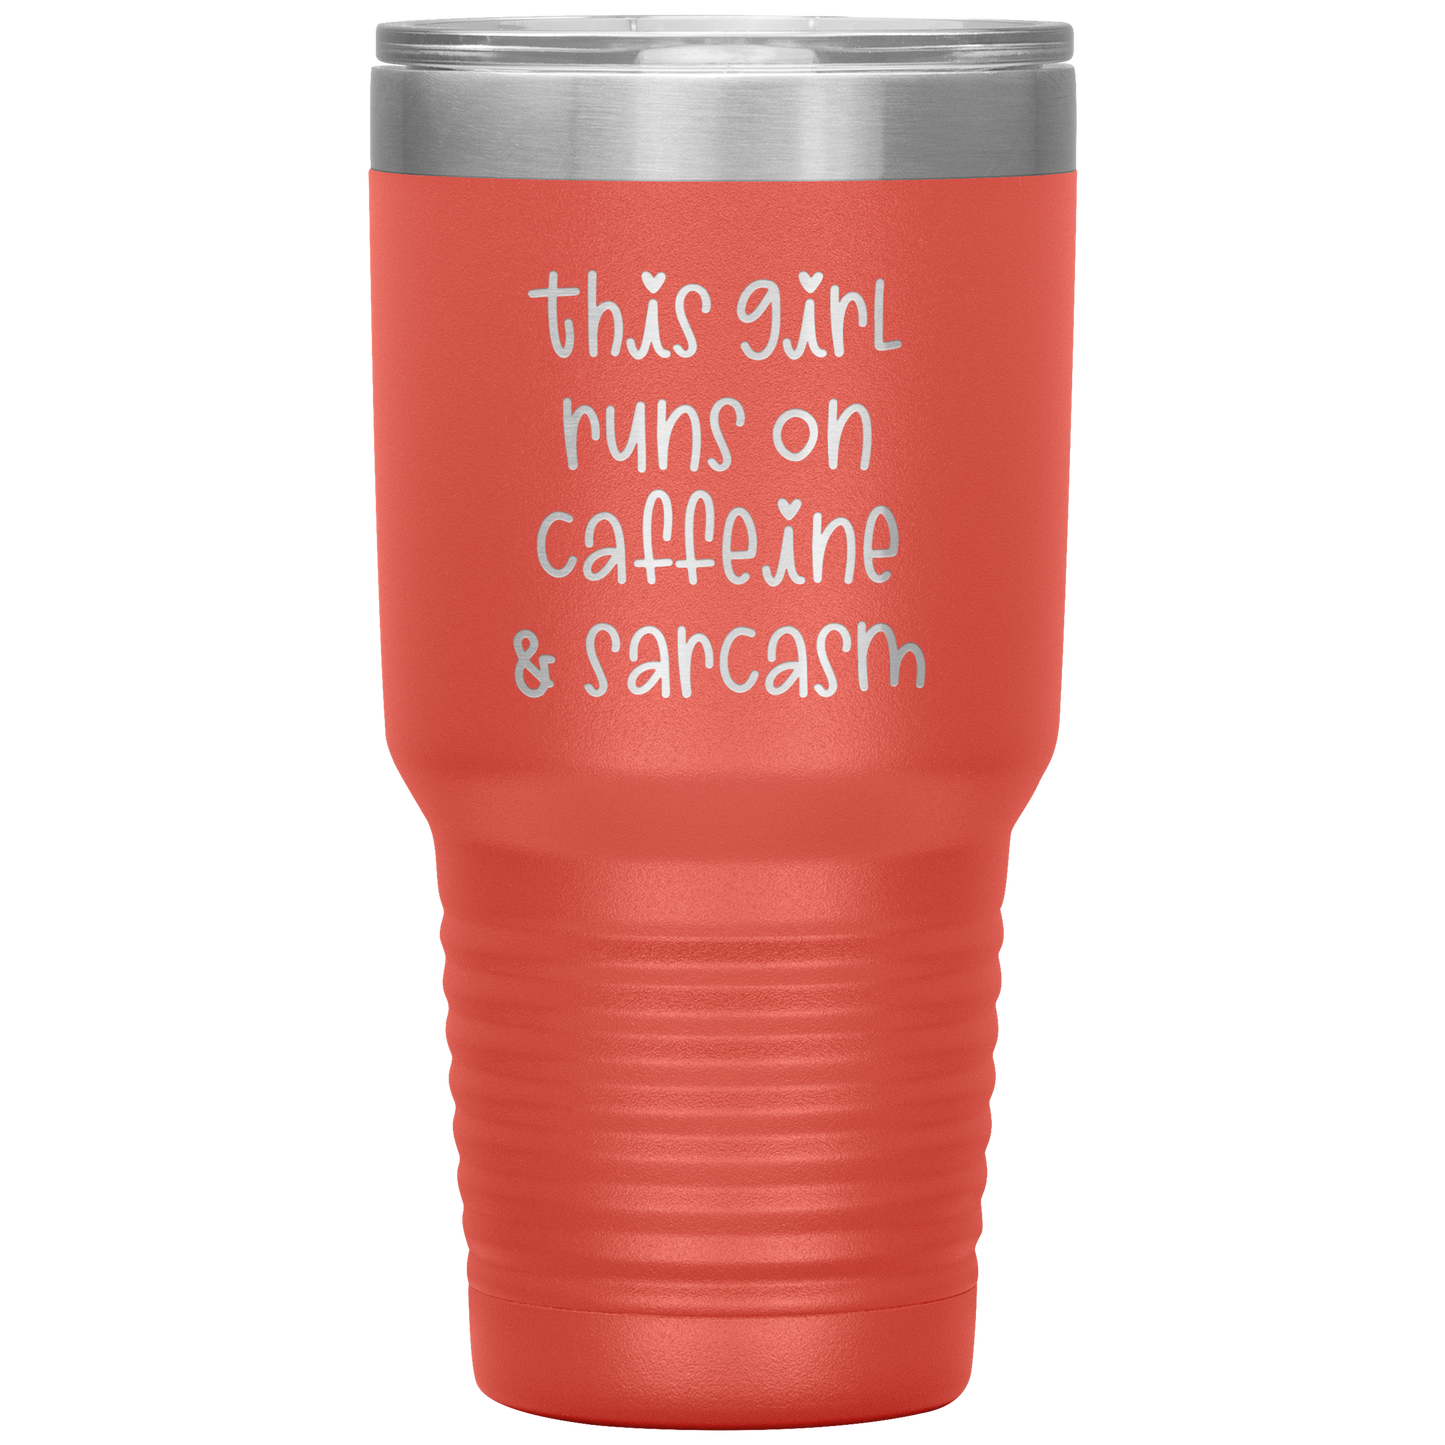 "This Girl Runs on Caffeine & Sarcasm" 30 oz. Insulated Stainless Steel Insulated Travel Coffee Cup with Lid